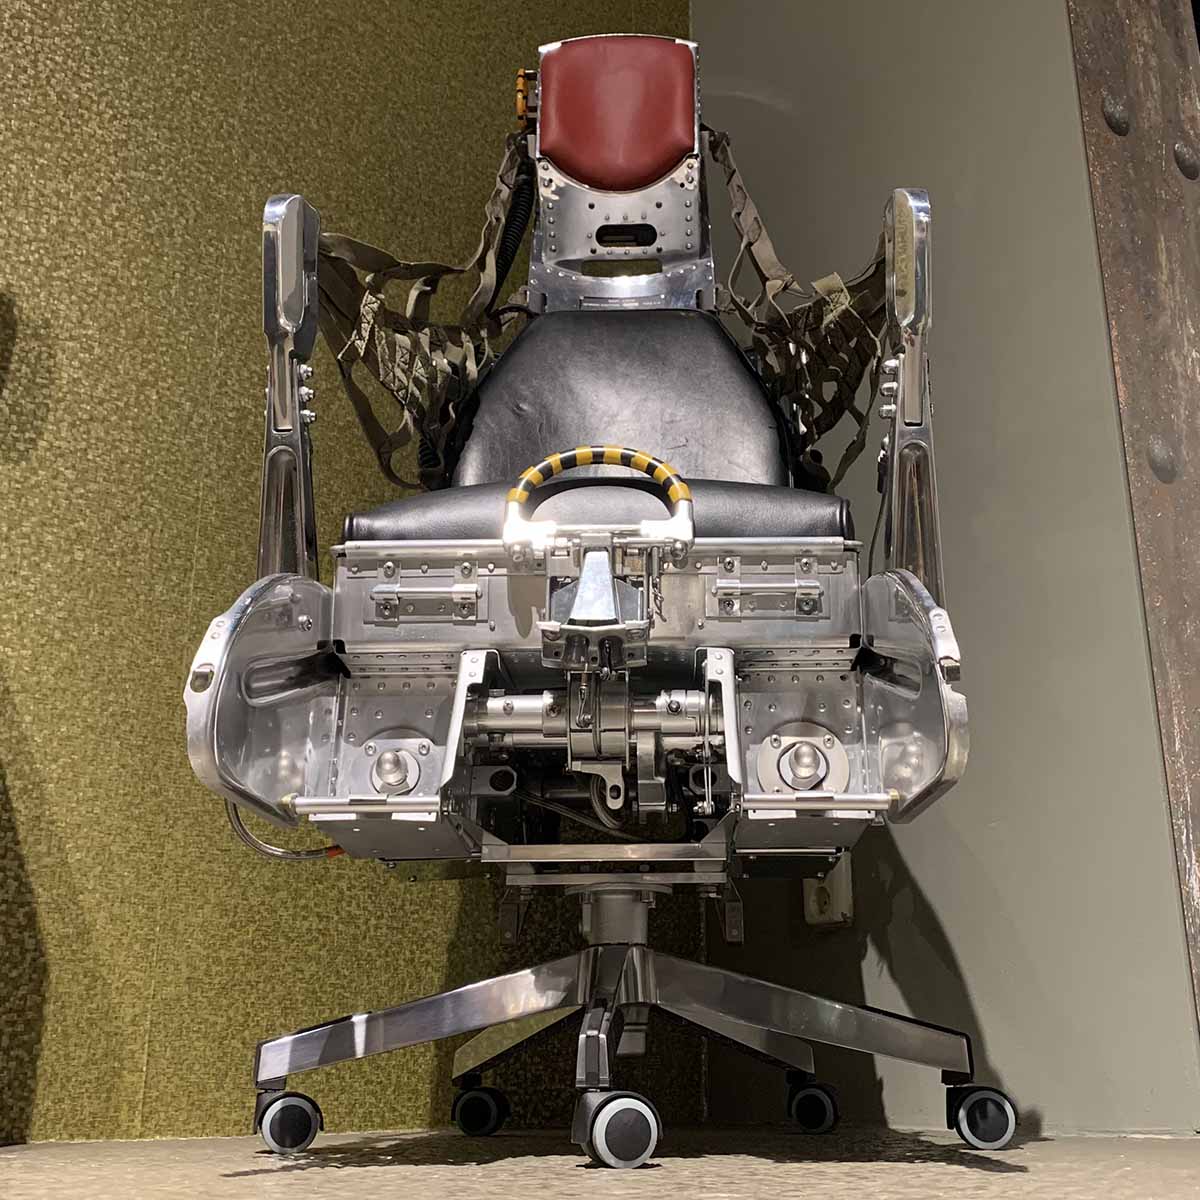 Office chair made of a polished Lockheed C2 ejection seat with arms in forward position.